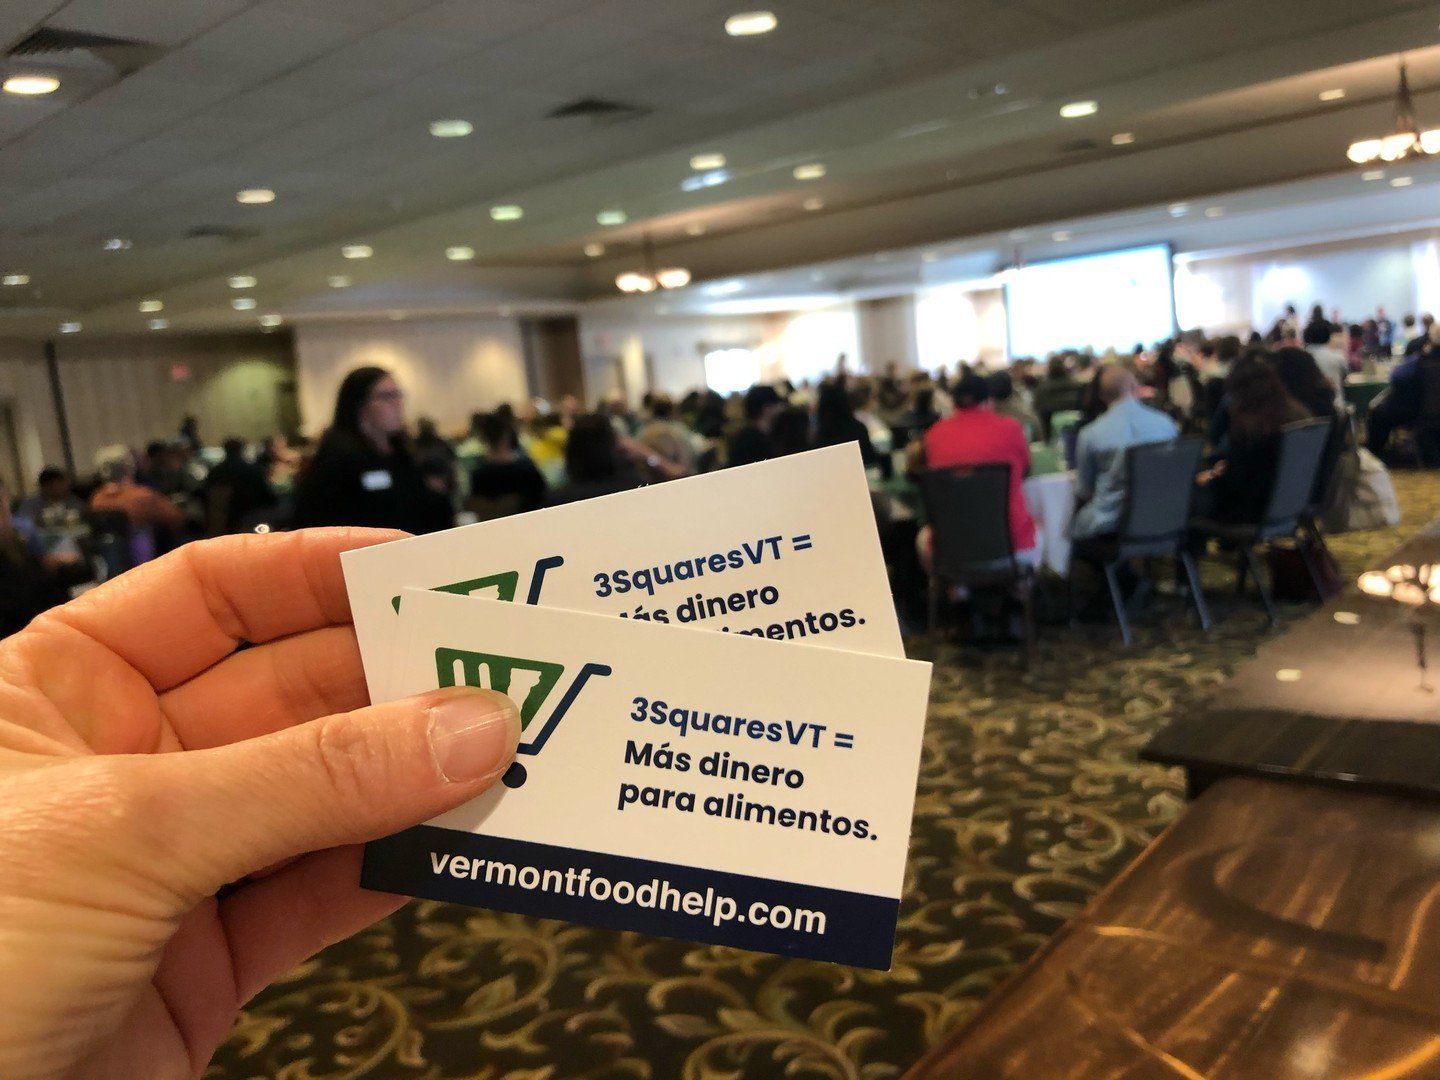 Earlier this month, Hunger Free Vermont attended the annual Hunger Action Conference hosted by our partners at the @vermontfoodbank. Each year, this conference brings together community partners, local non-profits, state representatives, and other ad